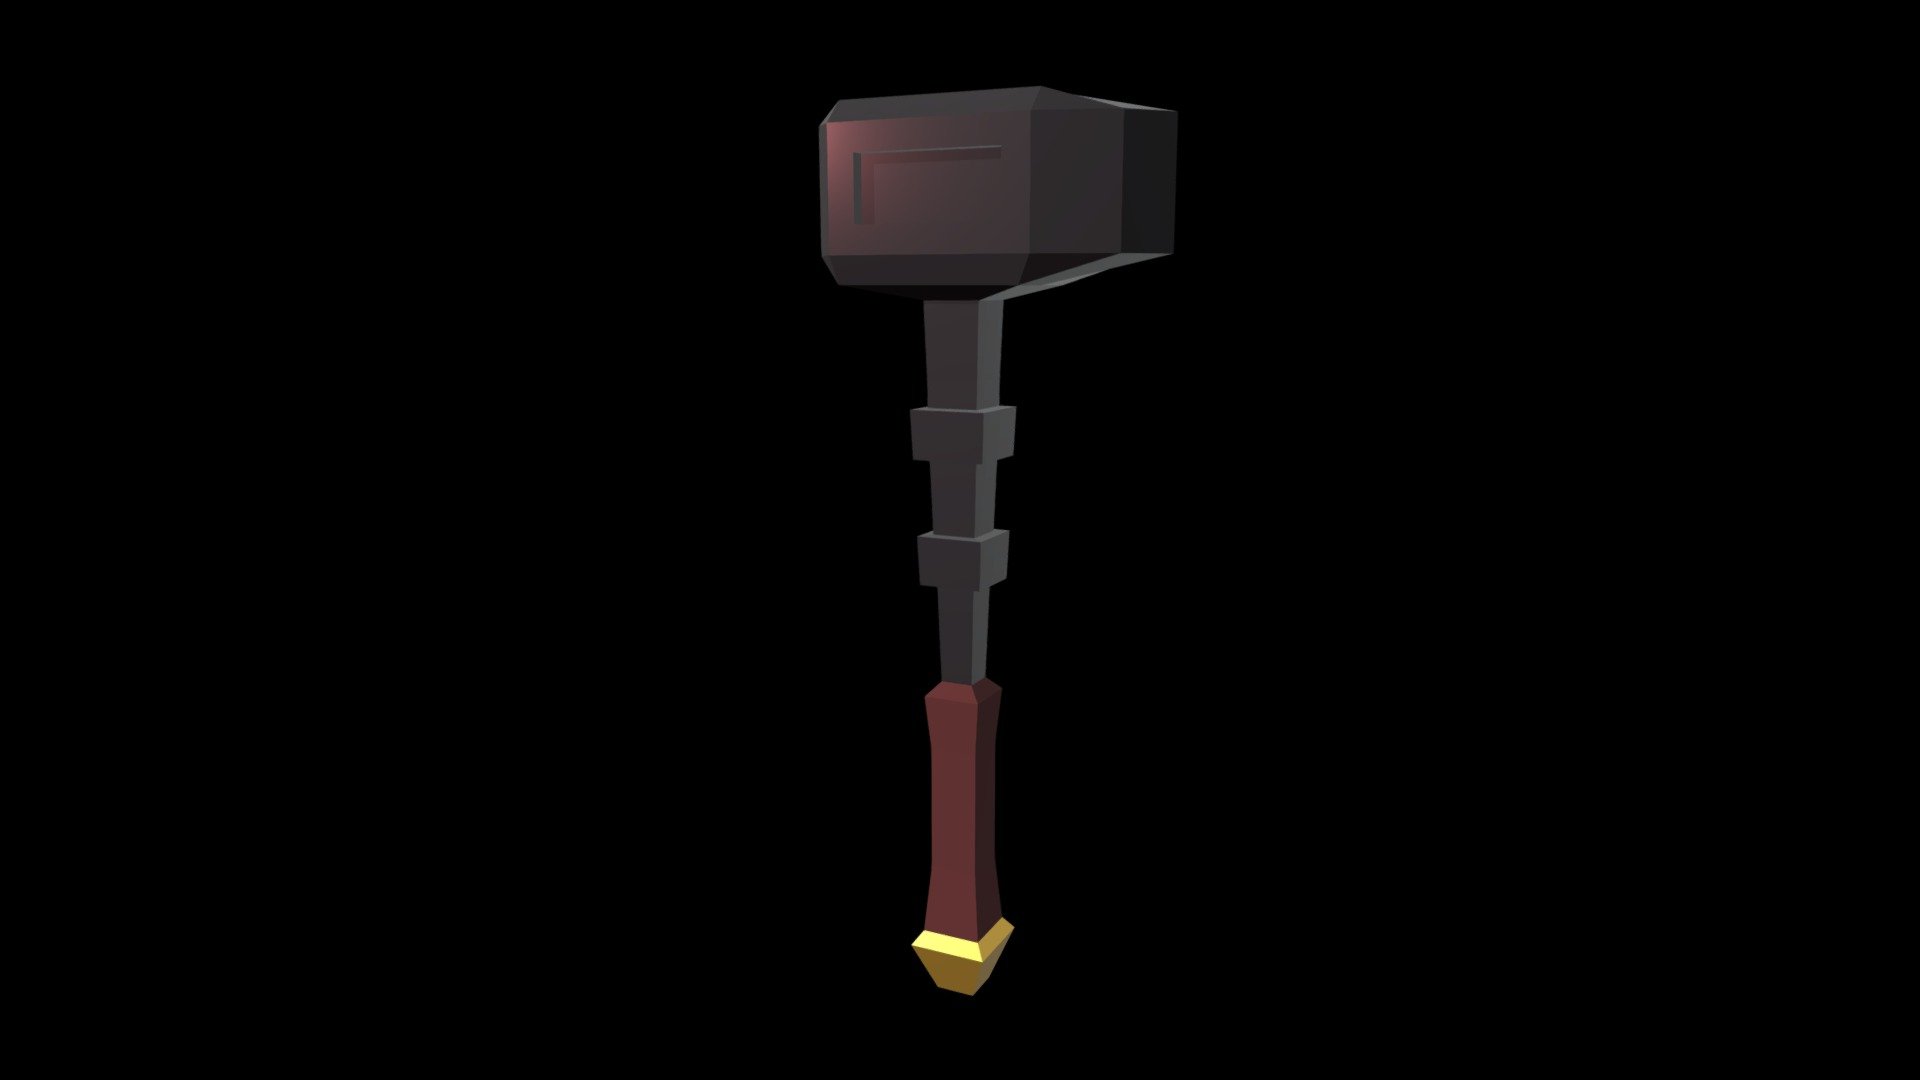 Low poly weapon / item / prop asset for games &amp; animation 3d model